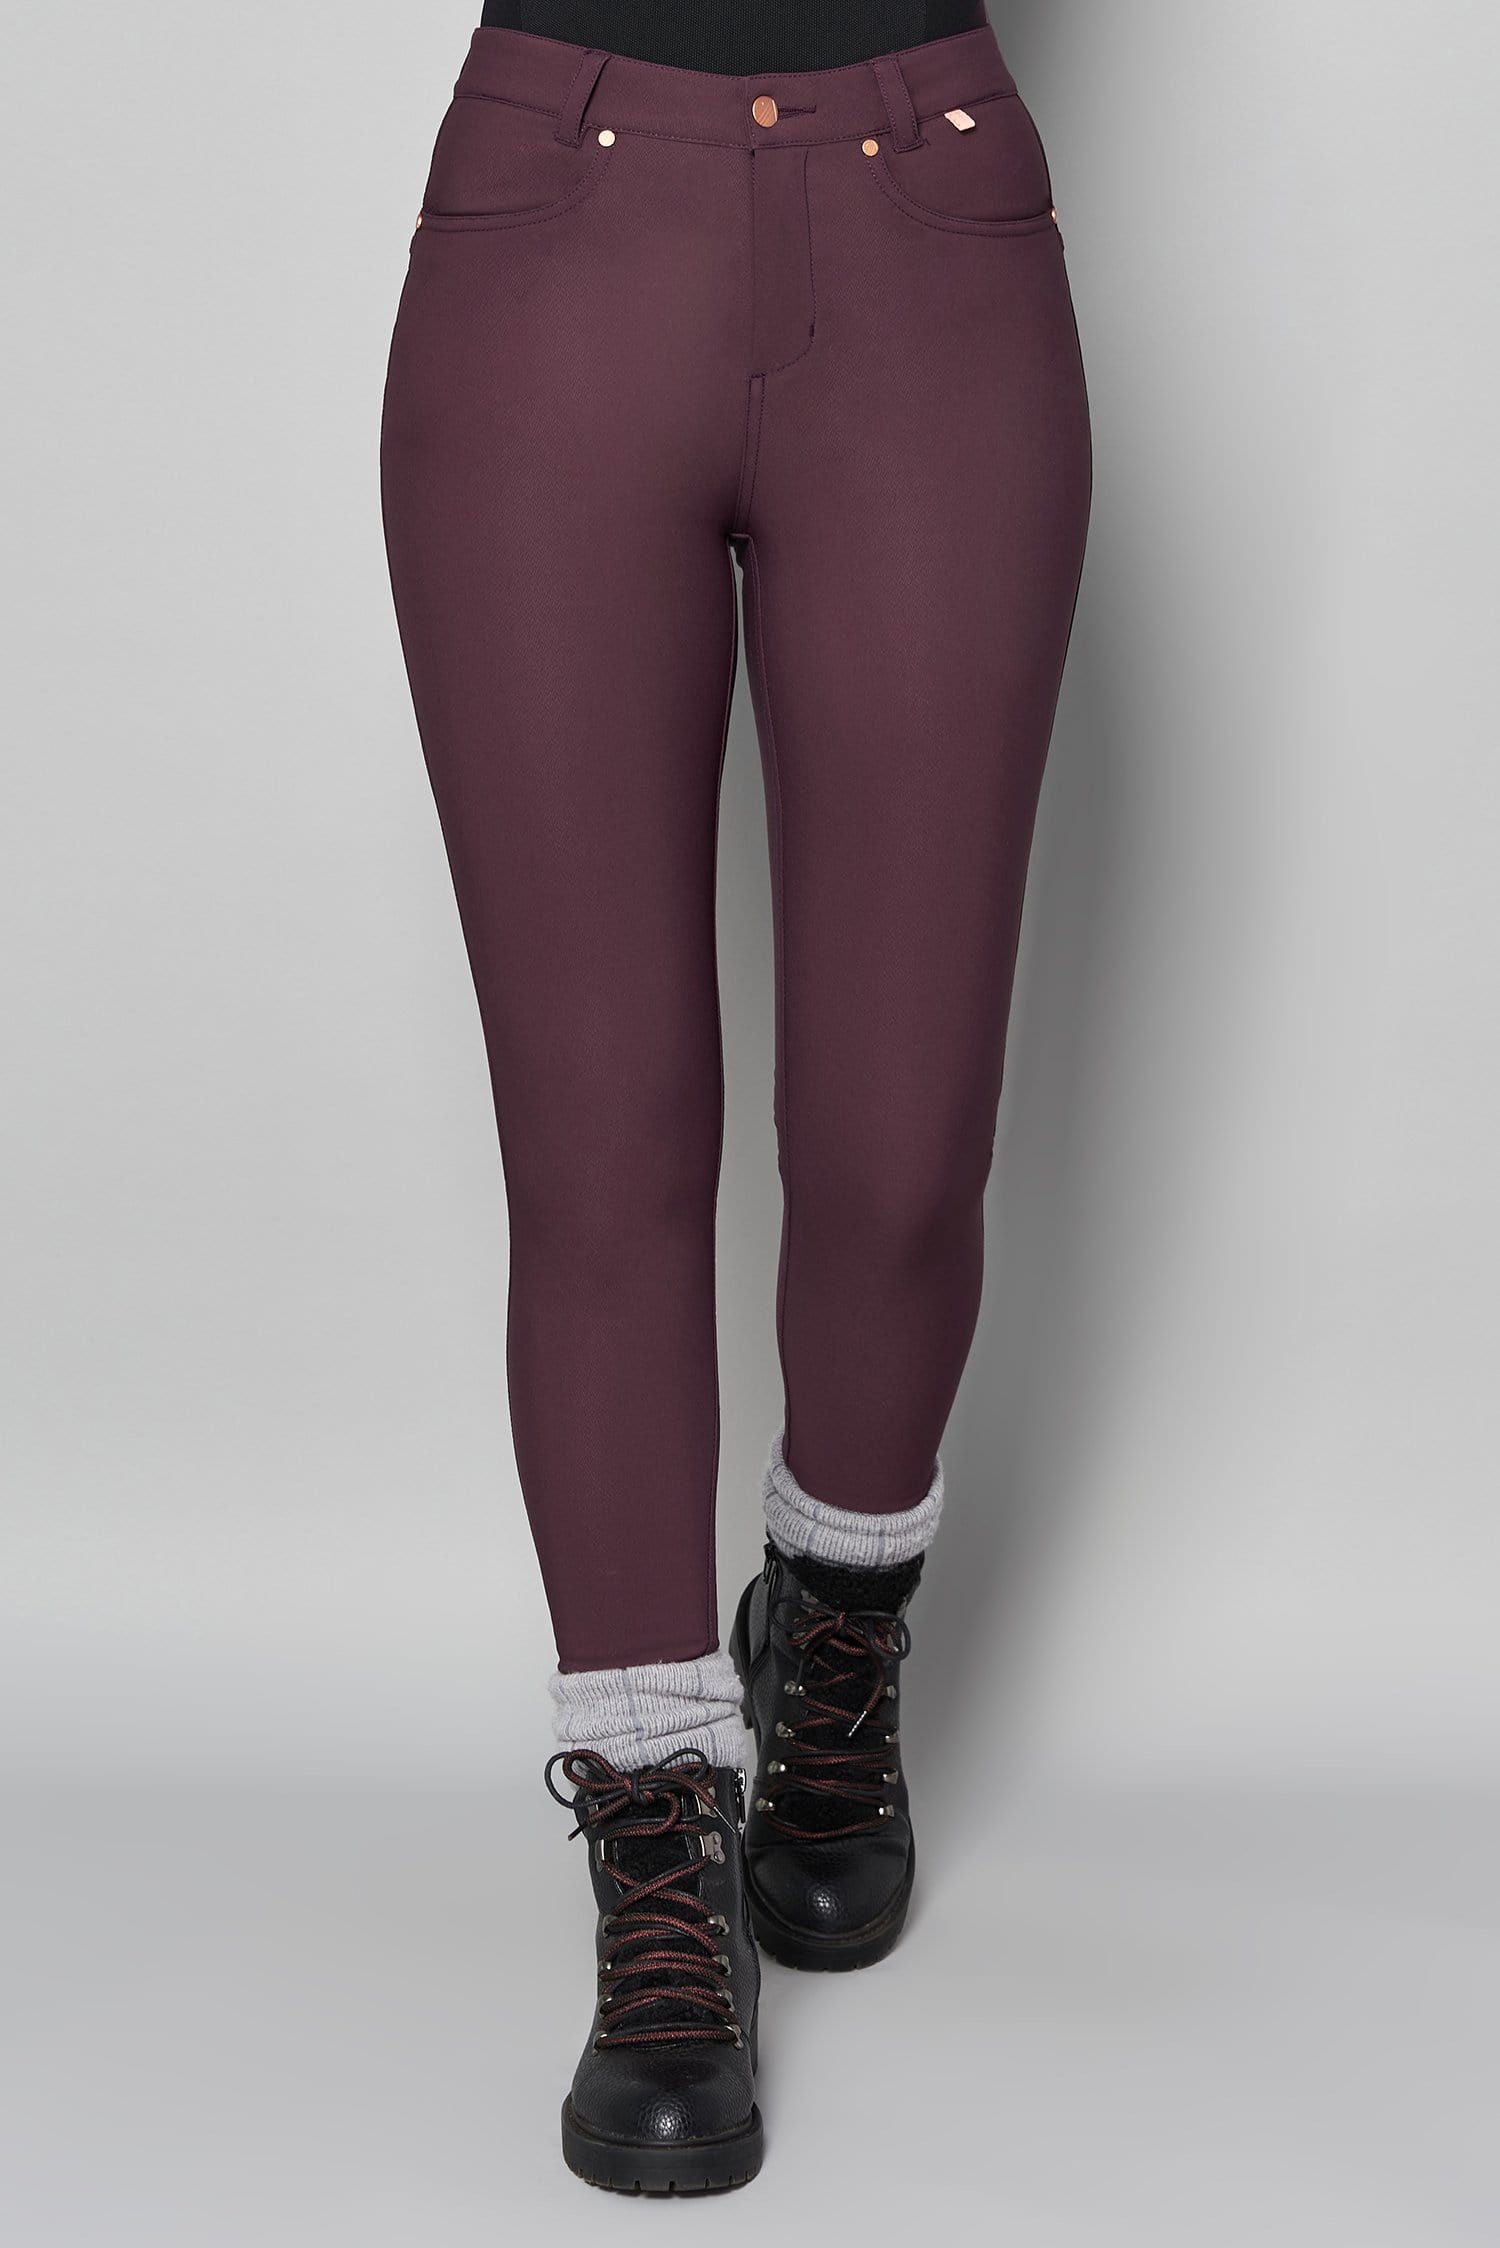 Thermal Skinny Outdoor Trousers - Aubergine - 26l / Uk8 - Womens - Acai Outdoorwear